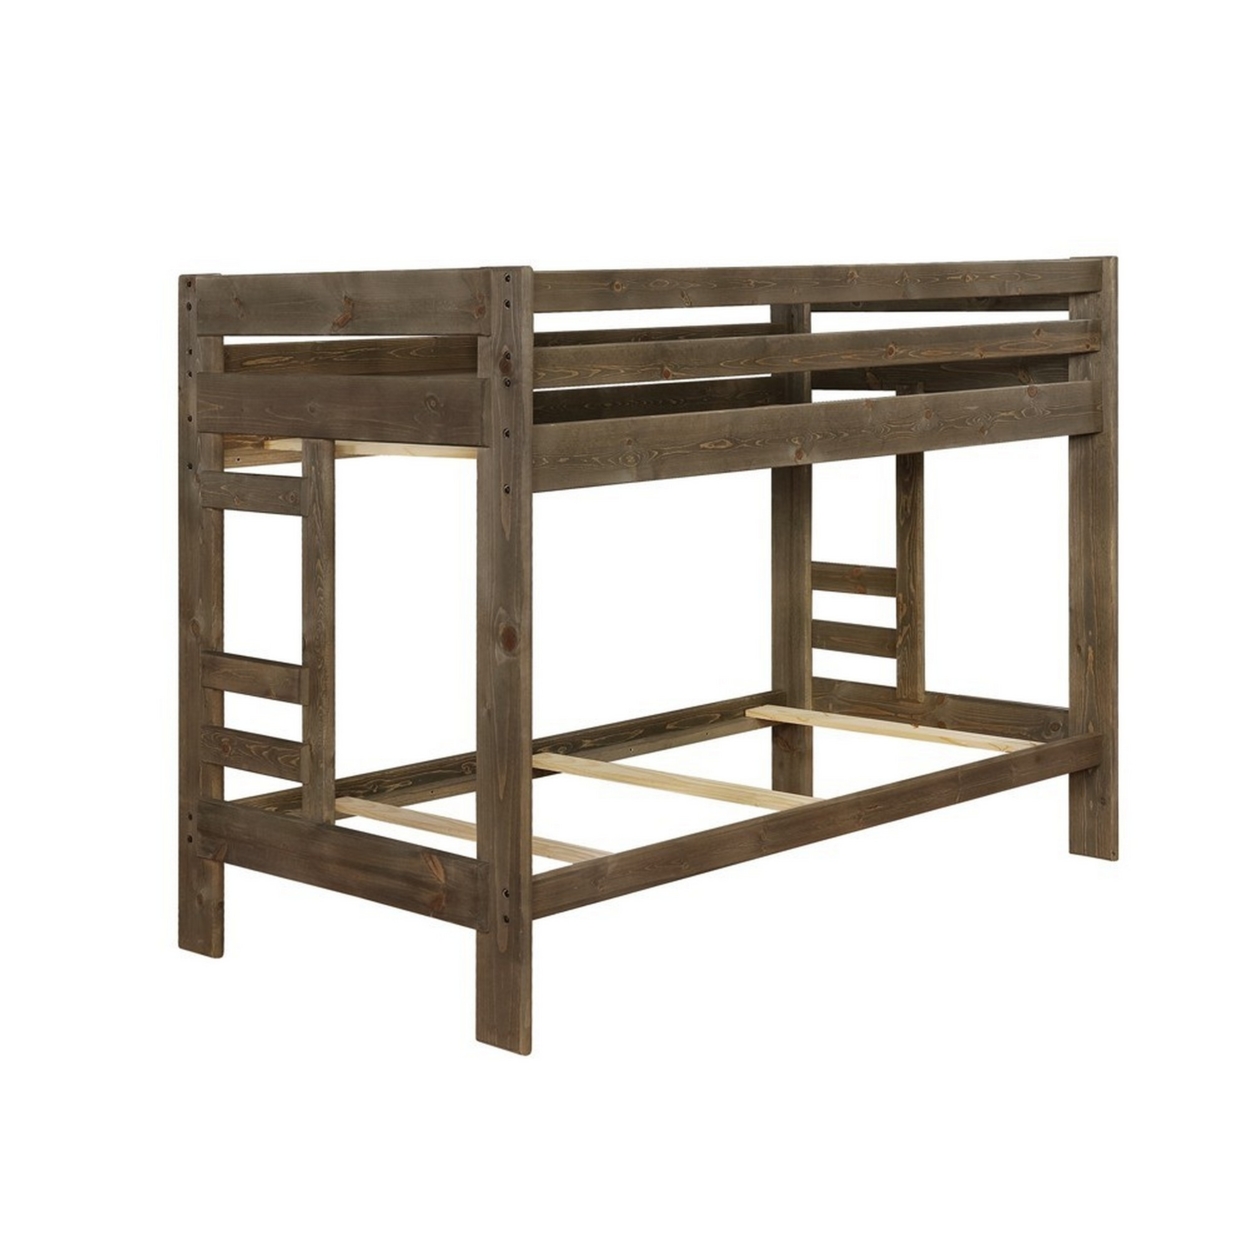 Transitional Style Wooden Twin Over Twin Bunk Bed With Guard Rails, Brown- Saltoro Sherpi